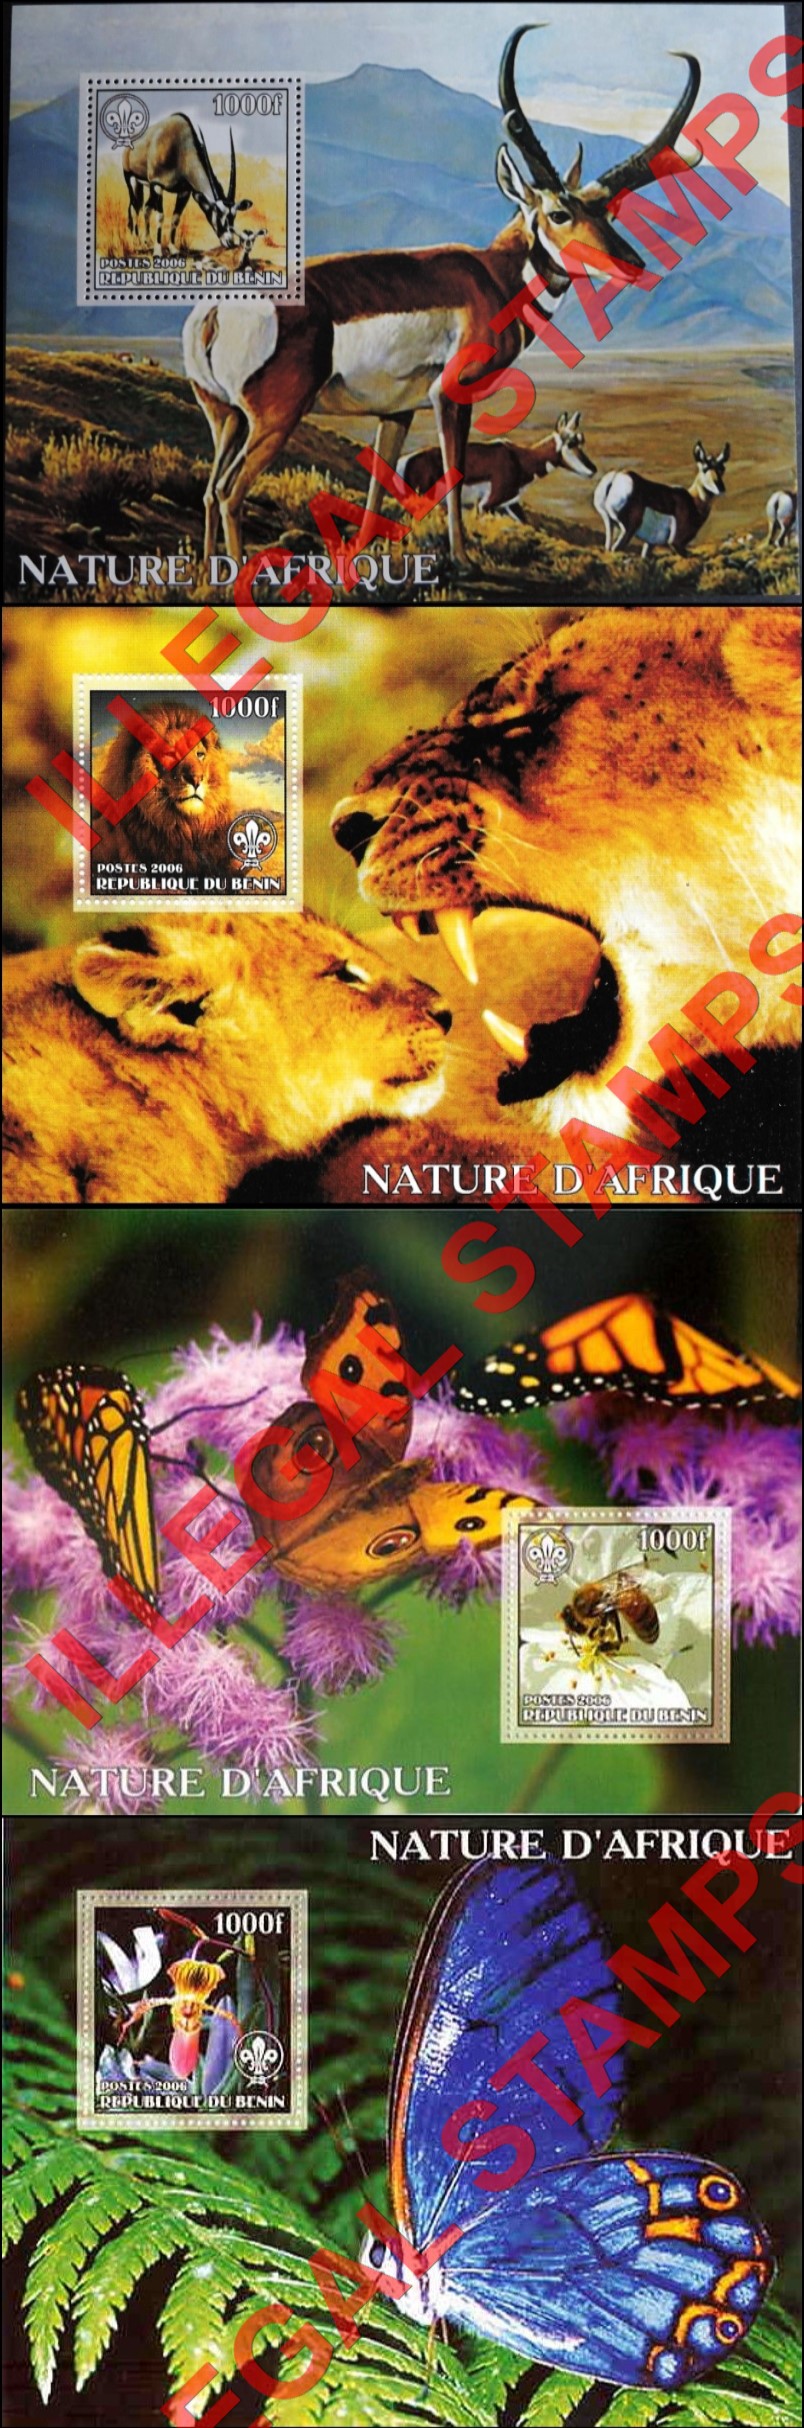 Benin 2006 Nature of Africa Illegal Stamp Souvenir Sheets of 1 (Part 3)